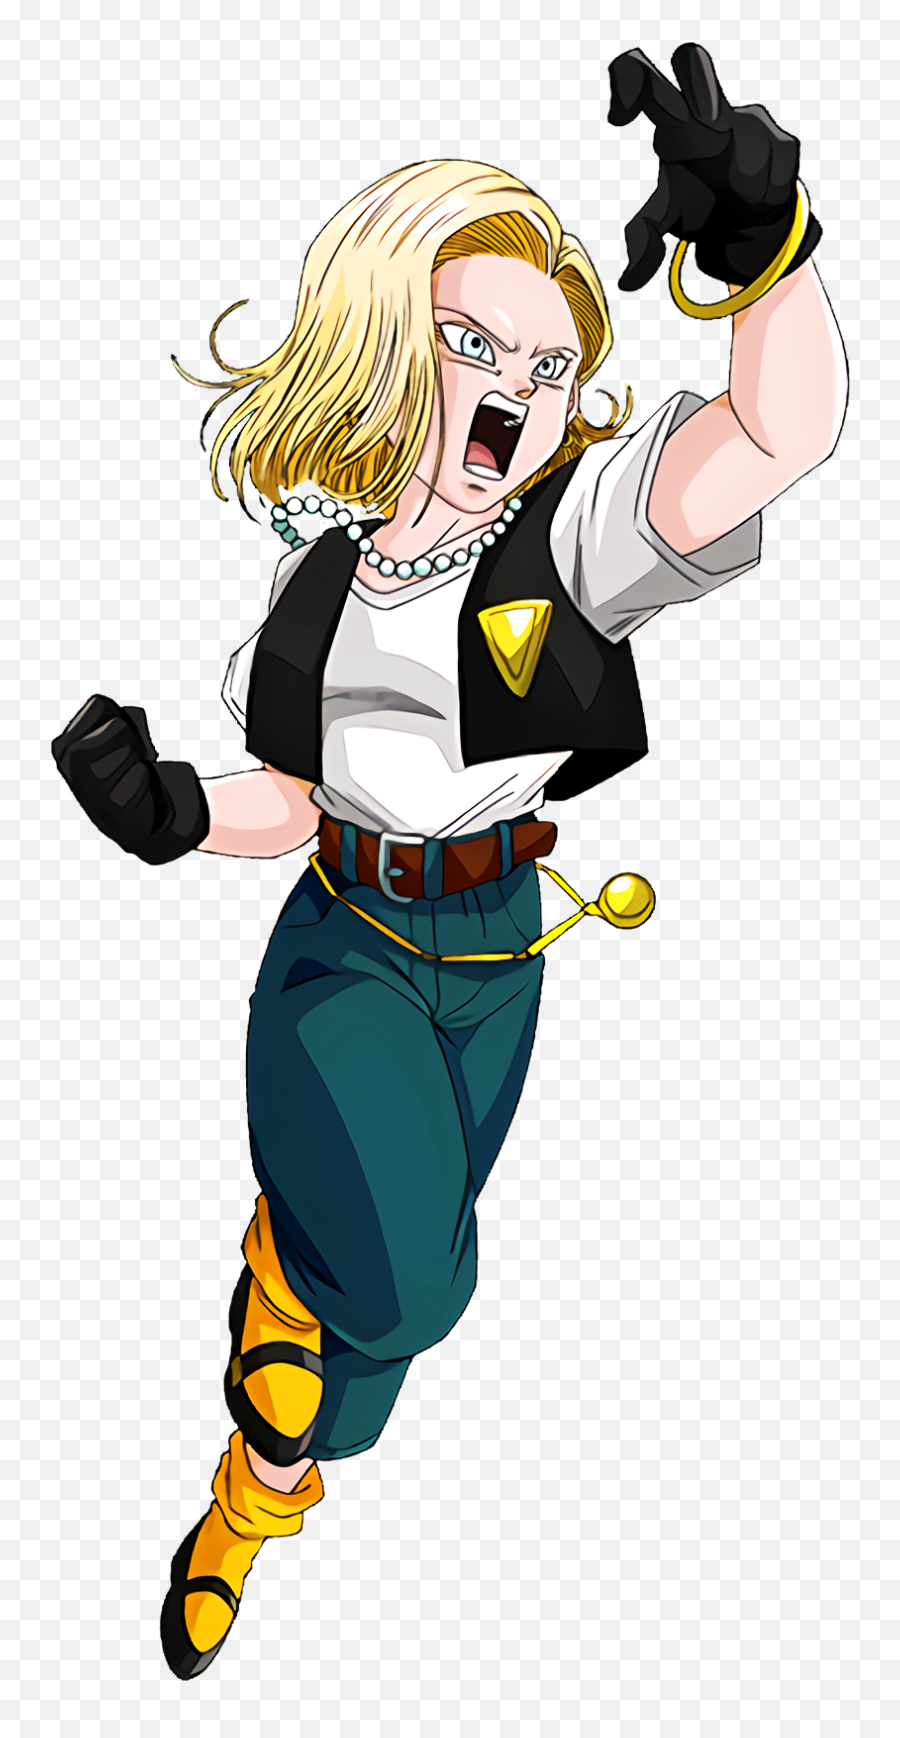 Mental Power That Continues To Resist - Android 18 Z Dokkan Emoji,Android 18 Png